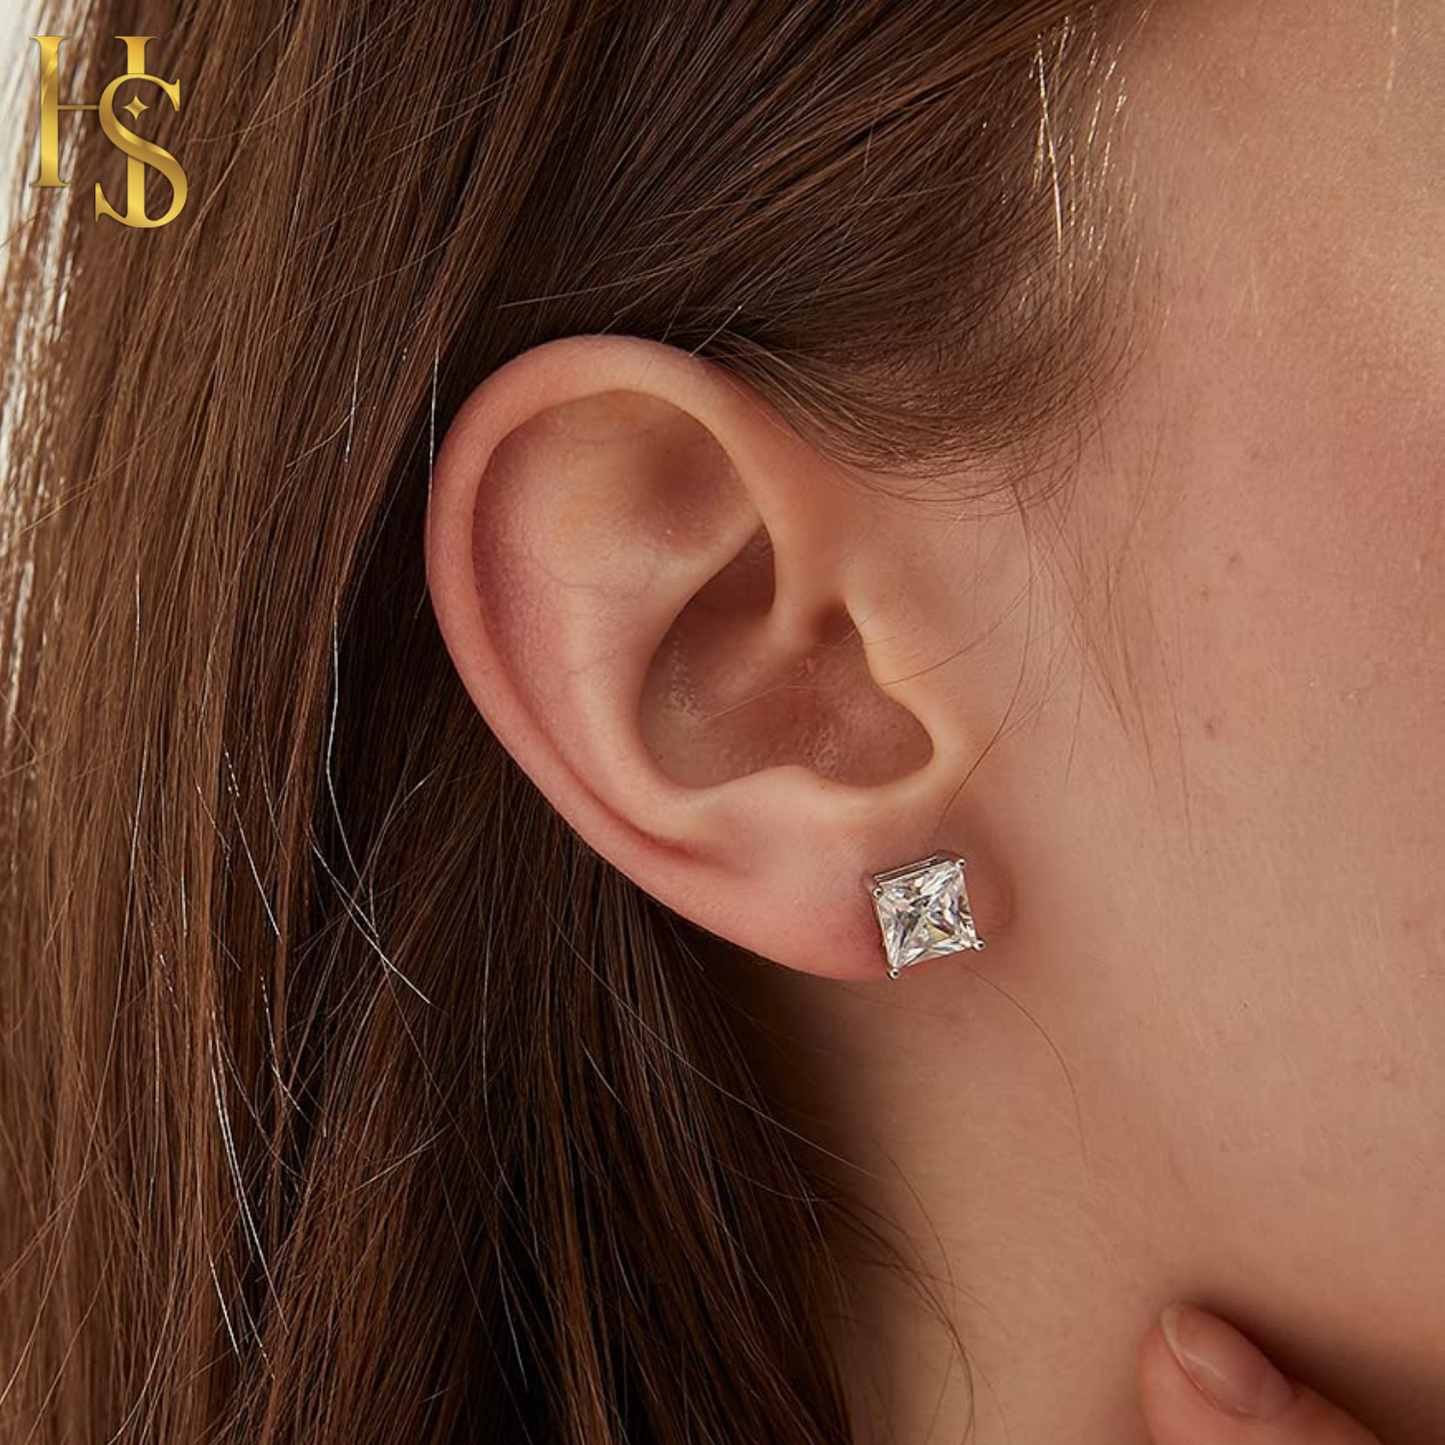 Square Solitaire Earrings in 92.5 Silver embellished with Princess Cut Swarovski Zirconia